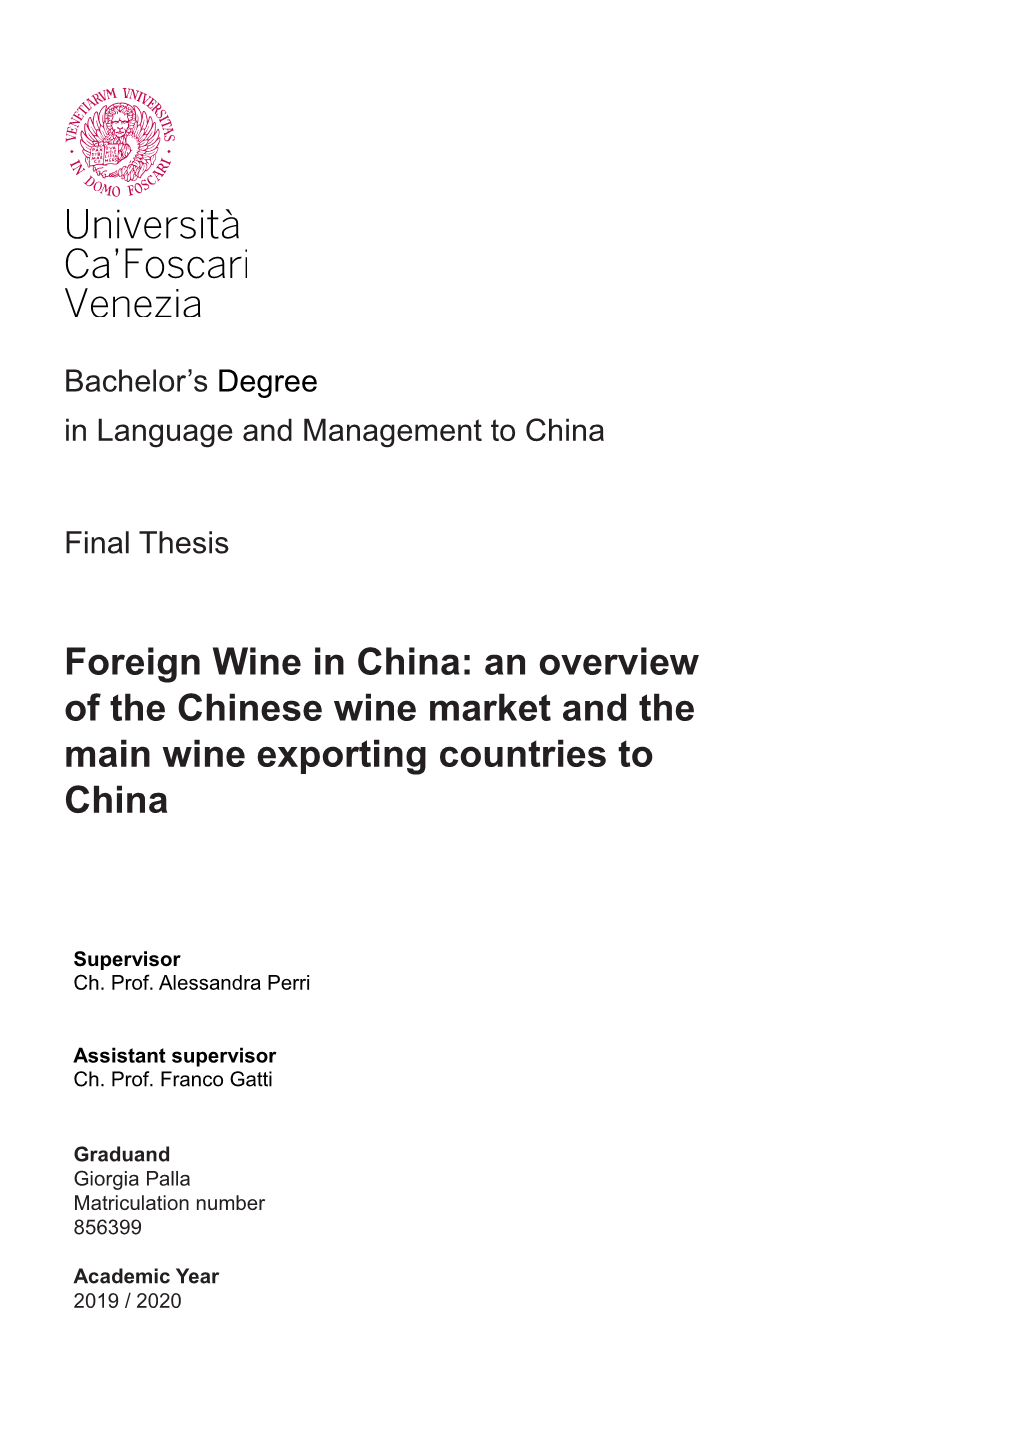 An Overview of the Chinese Wine Market and the Main Wine Exporting Countries to China